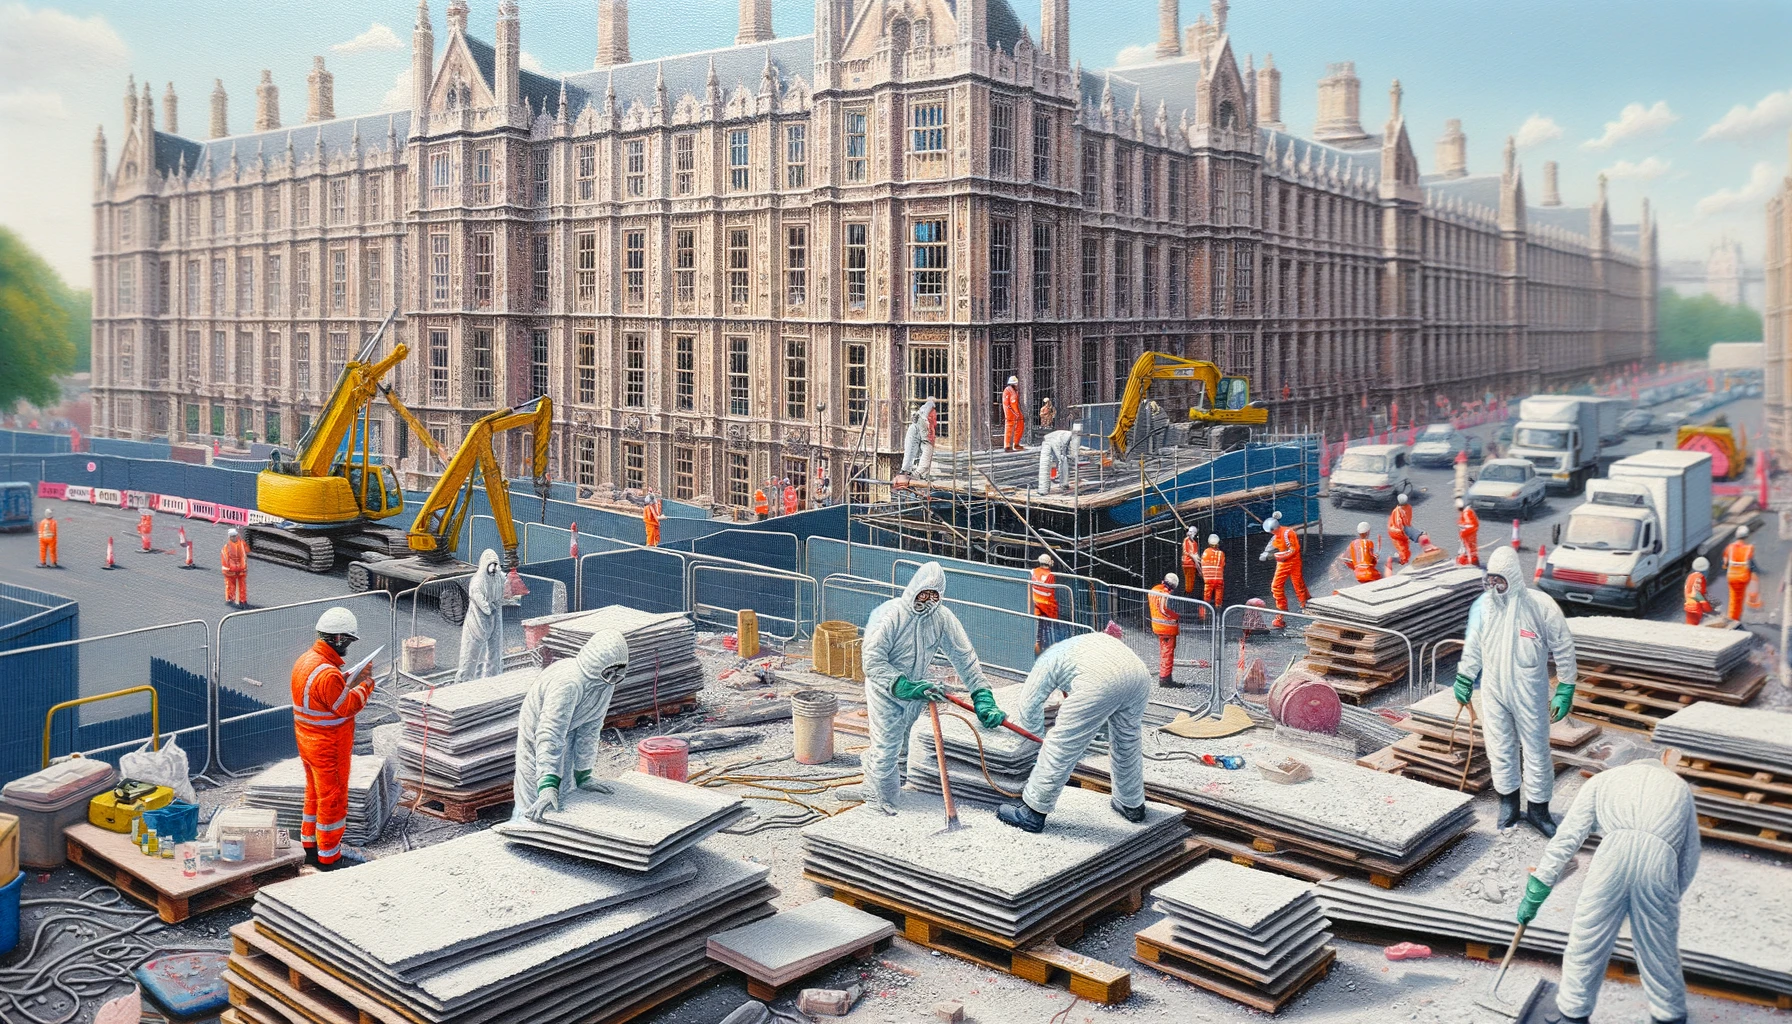 A detailed image of a construction site showing asbestos being handled, with less emphasis on the UK setting. The construction site should be bustling